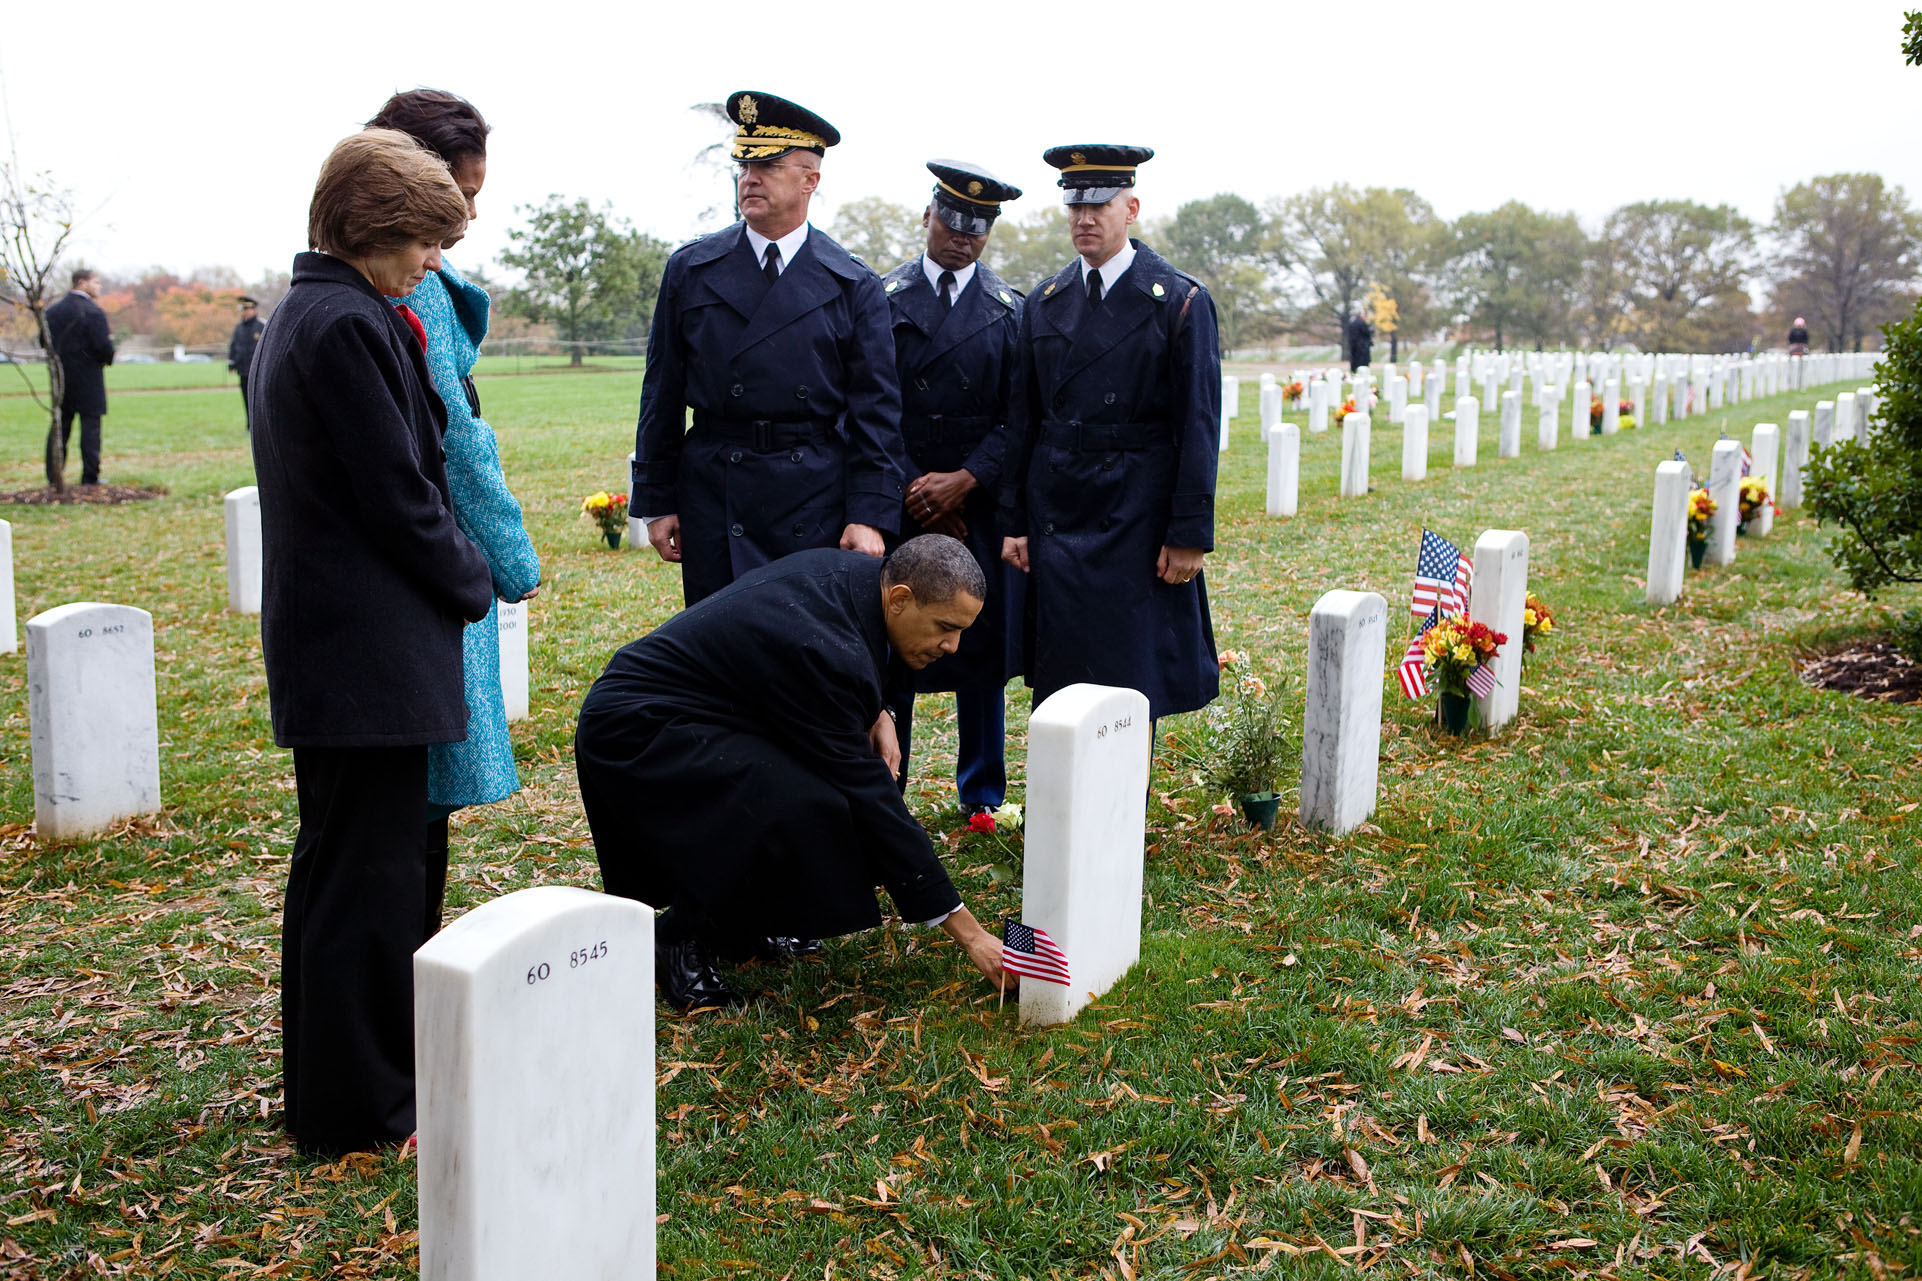 The President Pays Tribute to Those Who Made the Ultimate Sacrifice for their Country